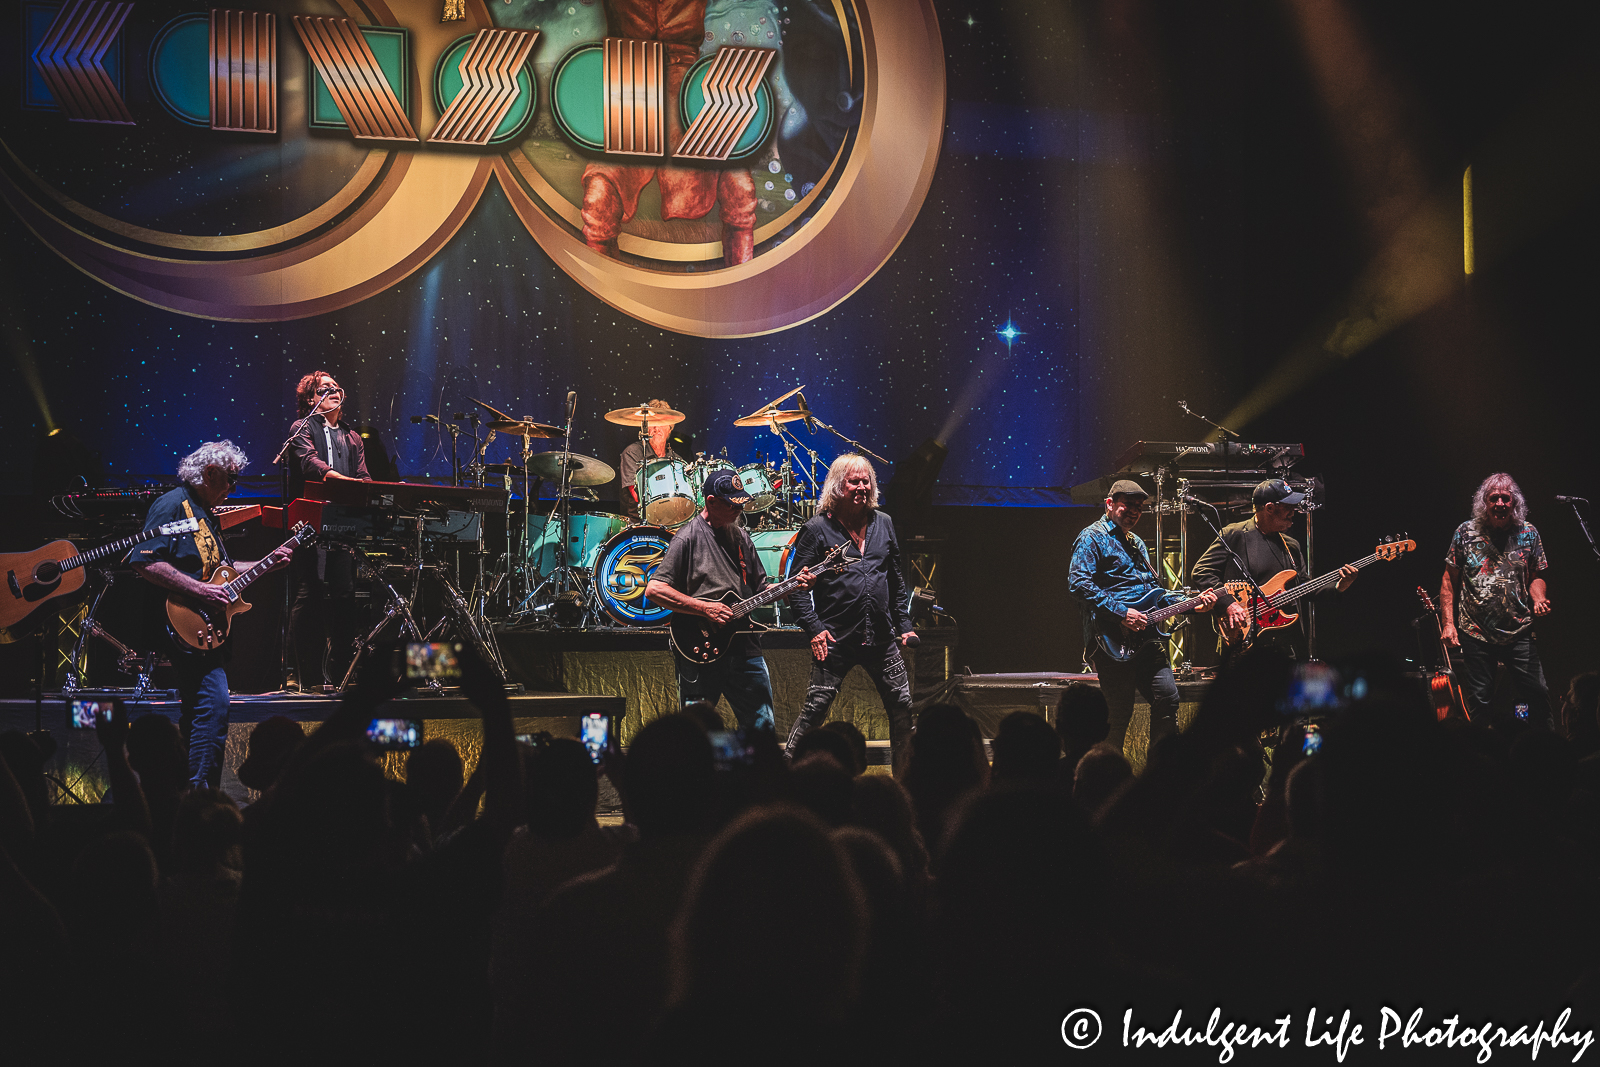 Rock band Kansas performing live on its 50th anniversary tour with founding members Rich Williams, Phil Ehart, Kerry Livgren and Dave Hope at The Midland in downtown Kansas City, MO on July 27, 2023.